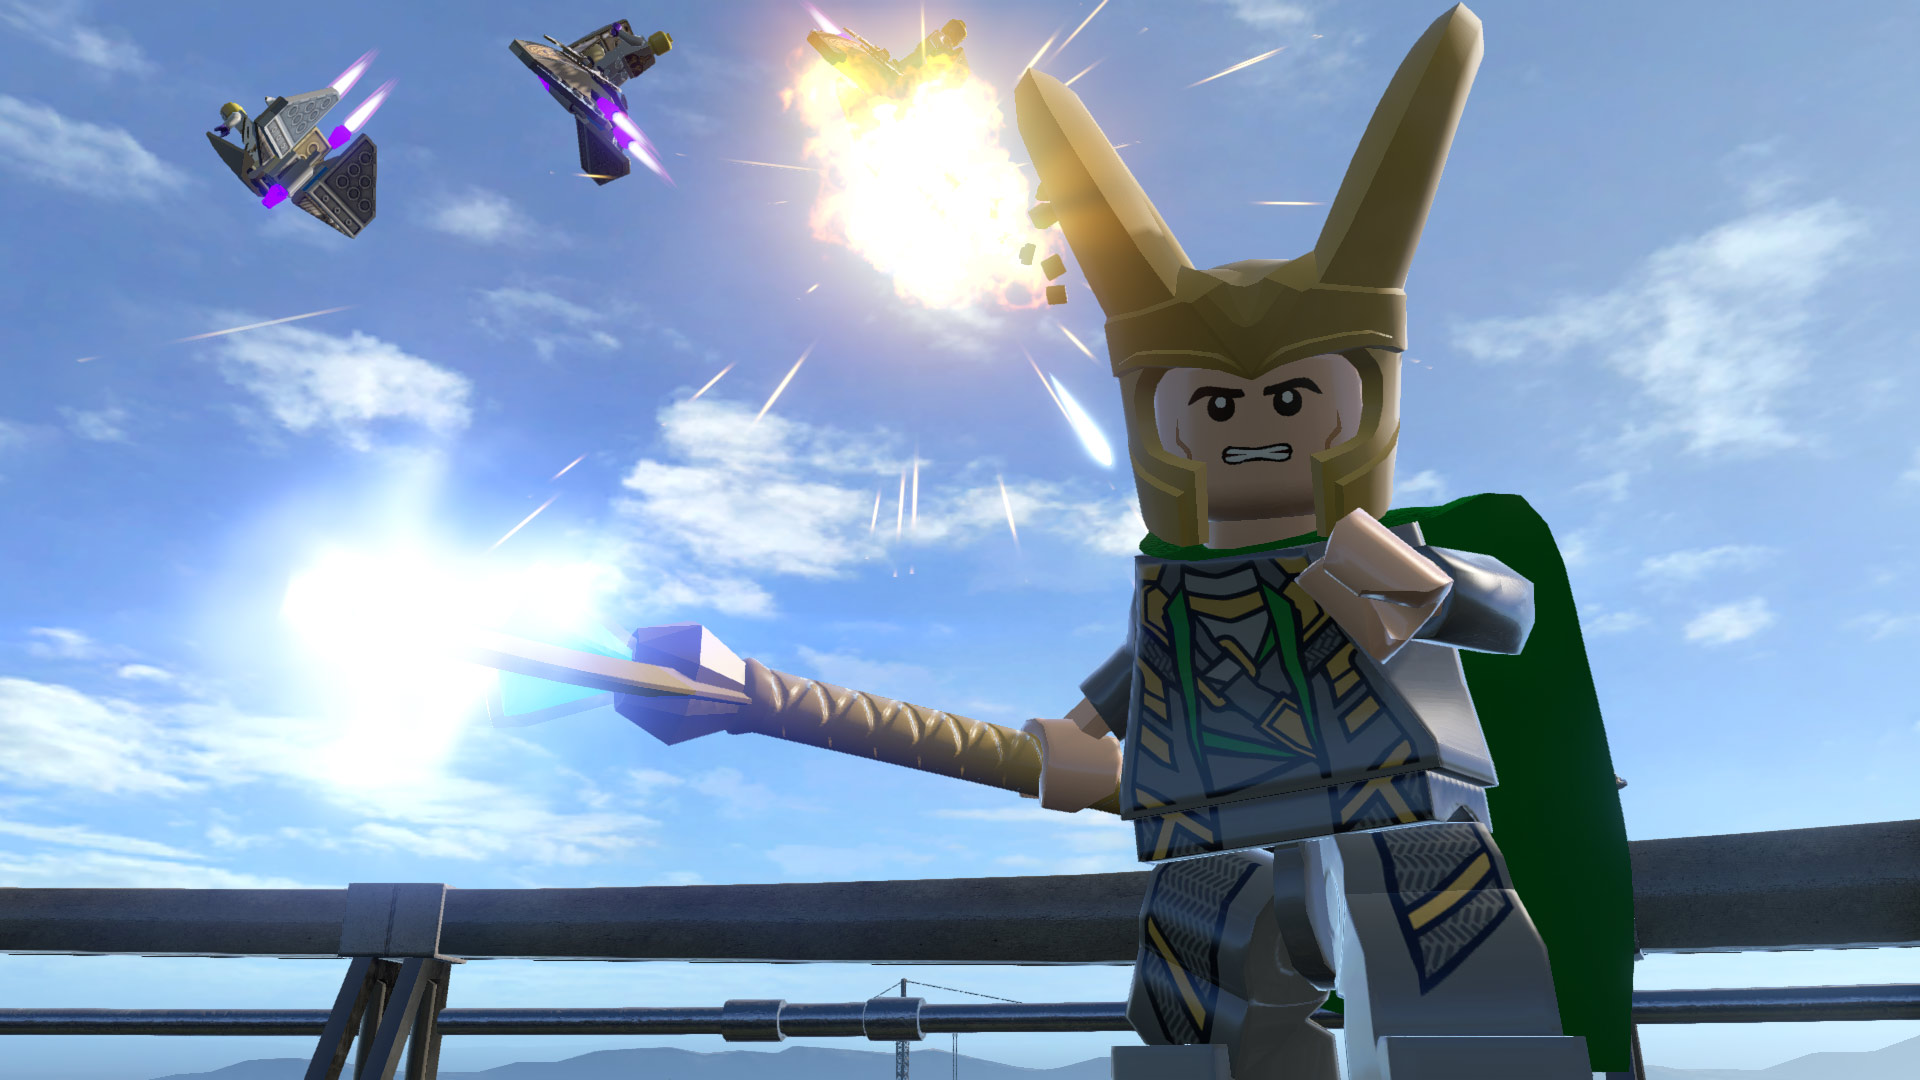 What are the system requirements for LEGO Marvel's Avengers on the PC? –  LEGO Games